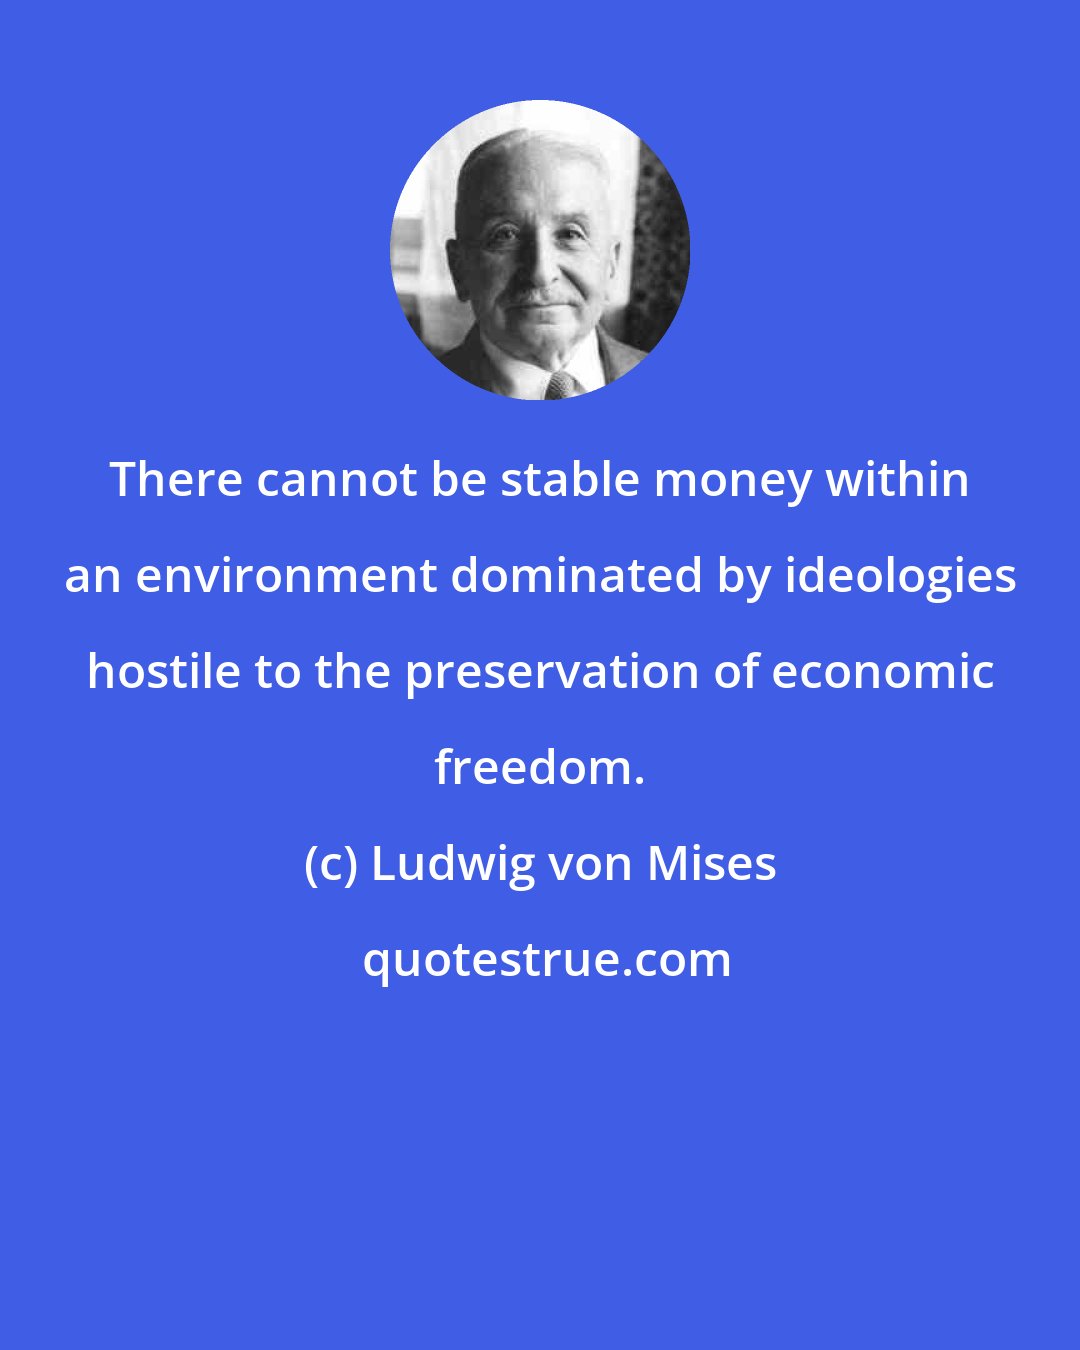 Ludwig von Mises: There cannot be stable money within an environment dominated by ideologies hostile to the preservation of economic freedom.